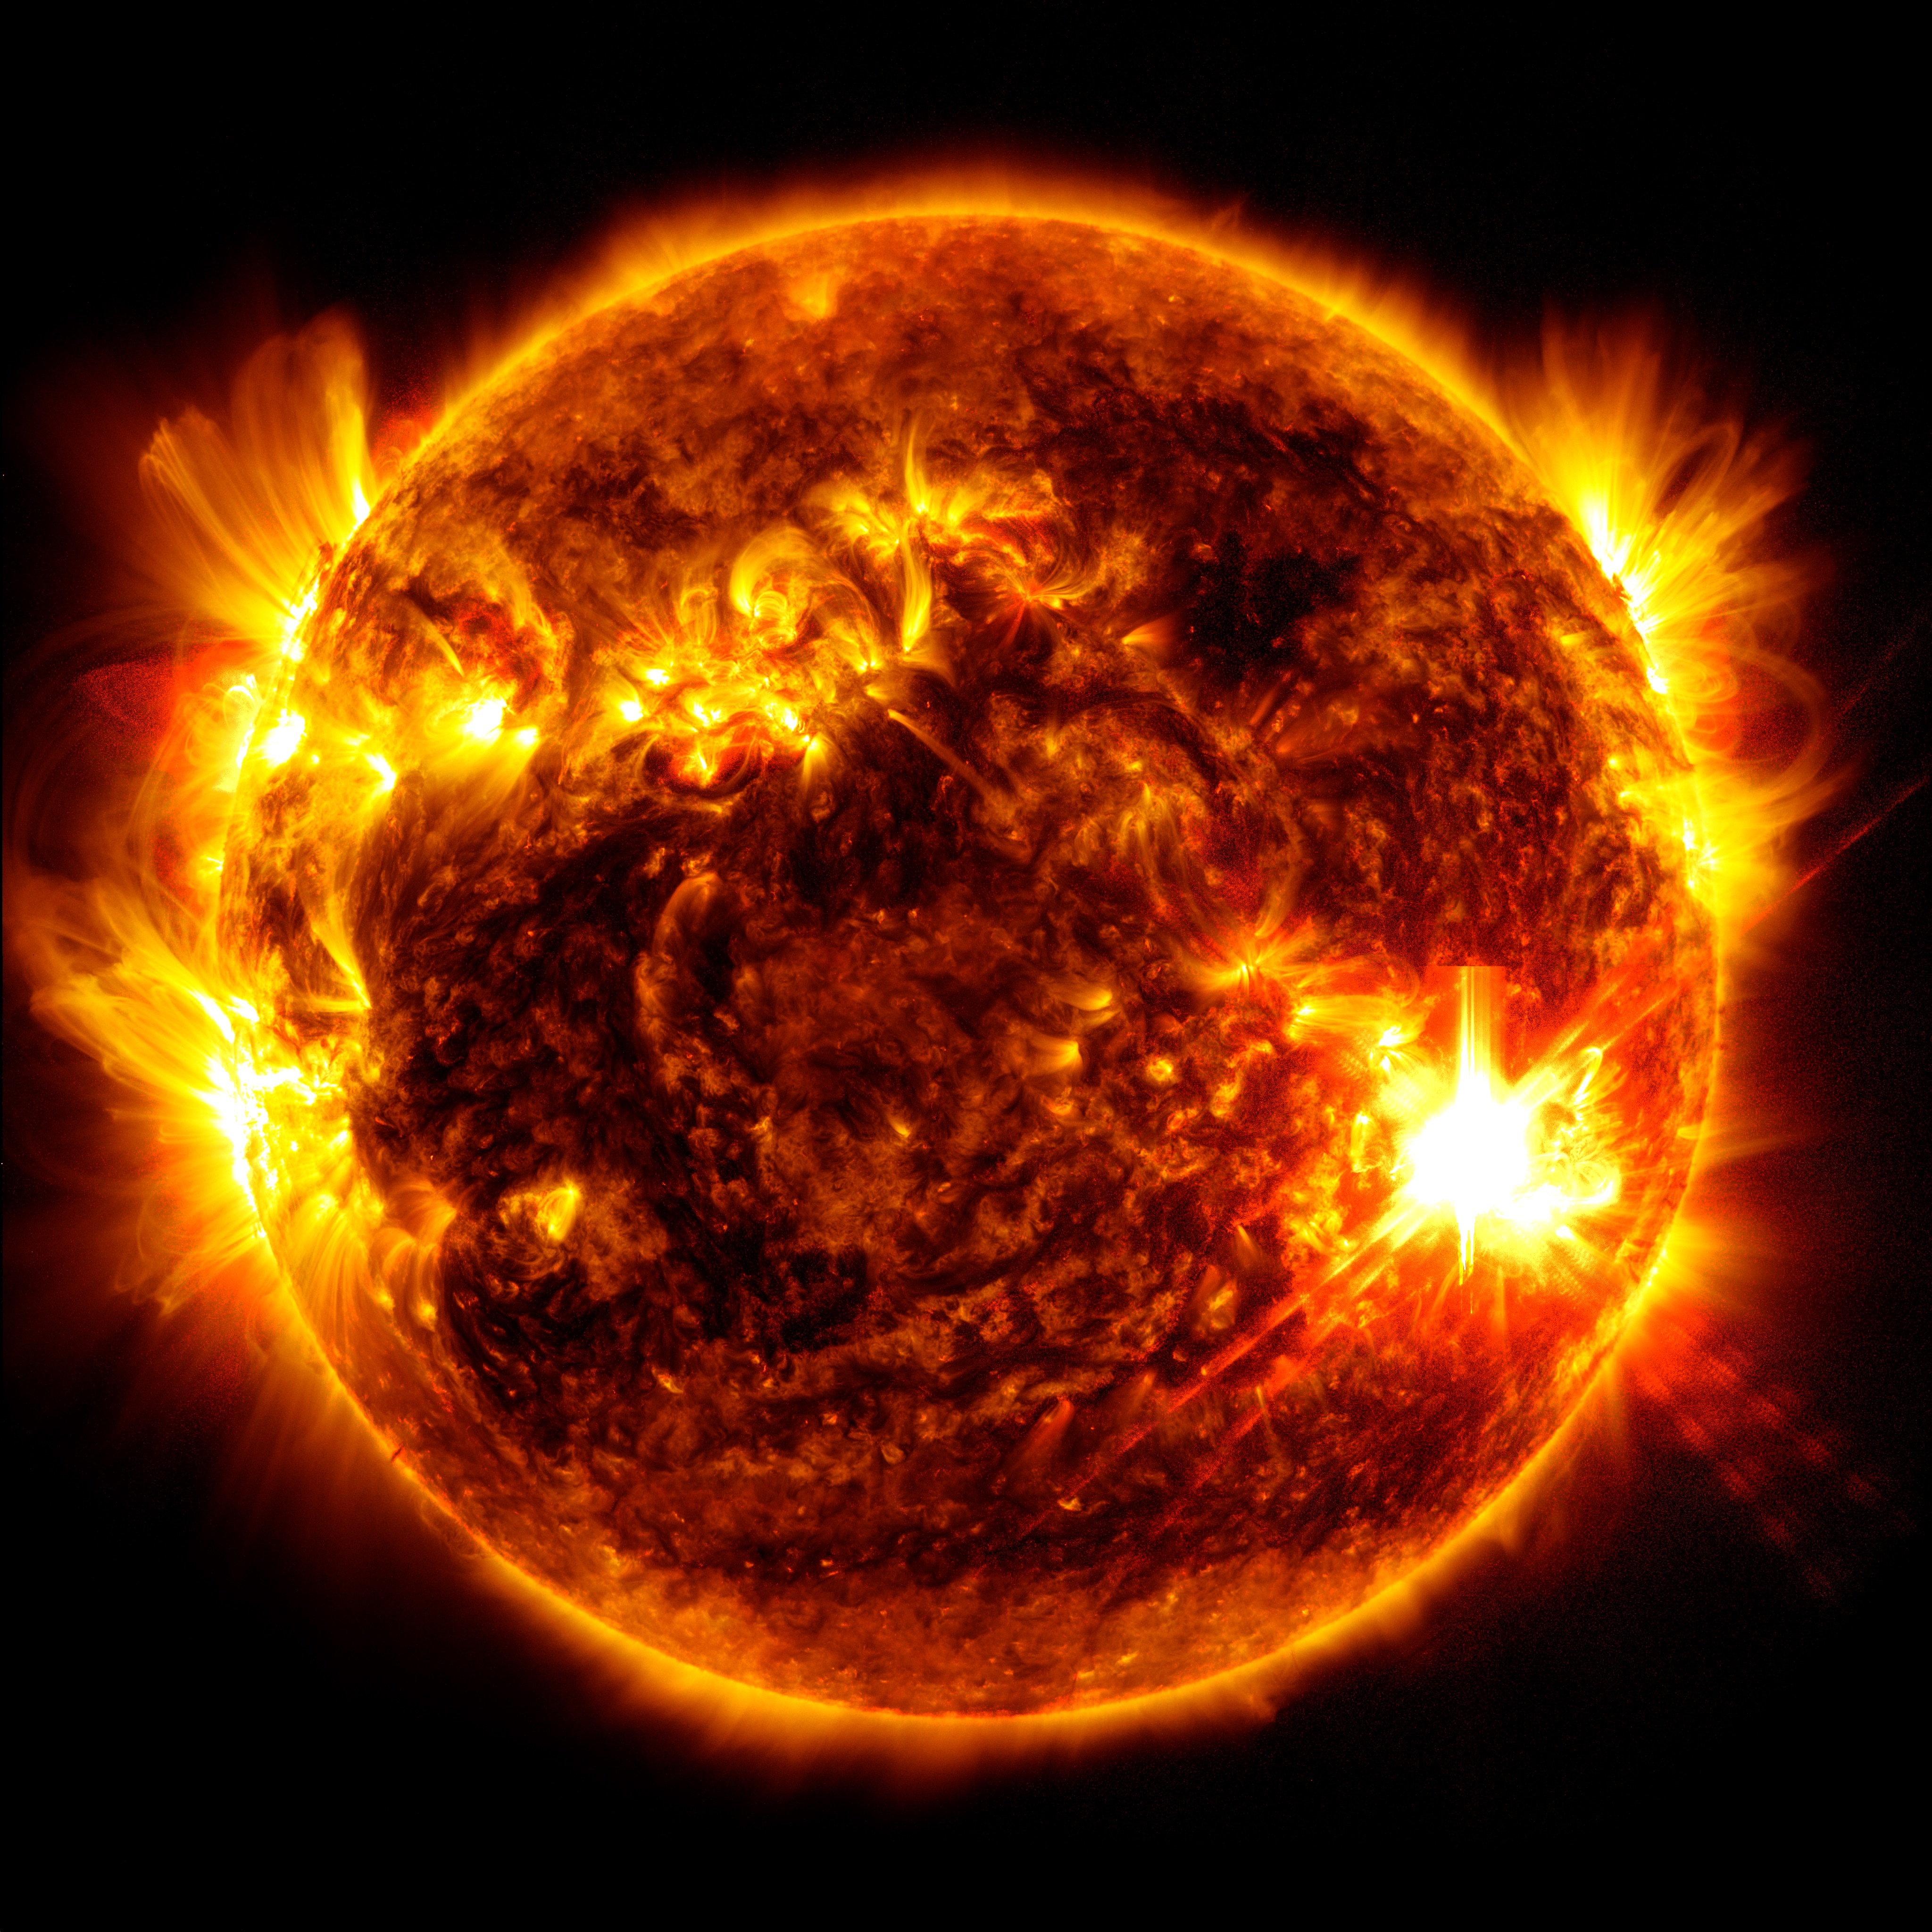 An image of the Sun shows a bright flash in the bottom right side where a solar flare erupts.